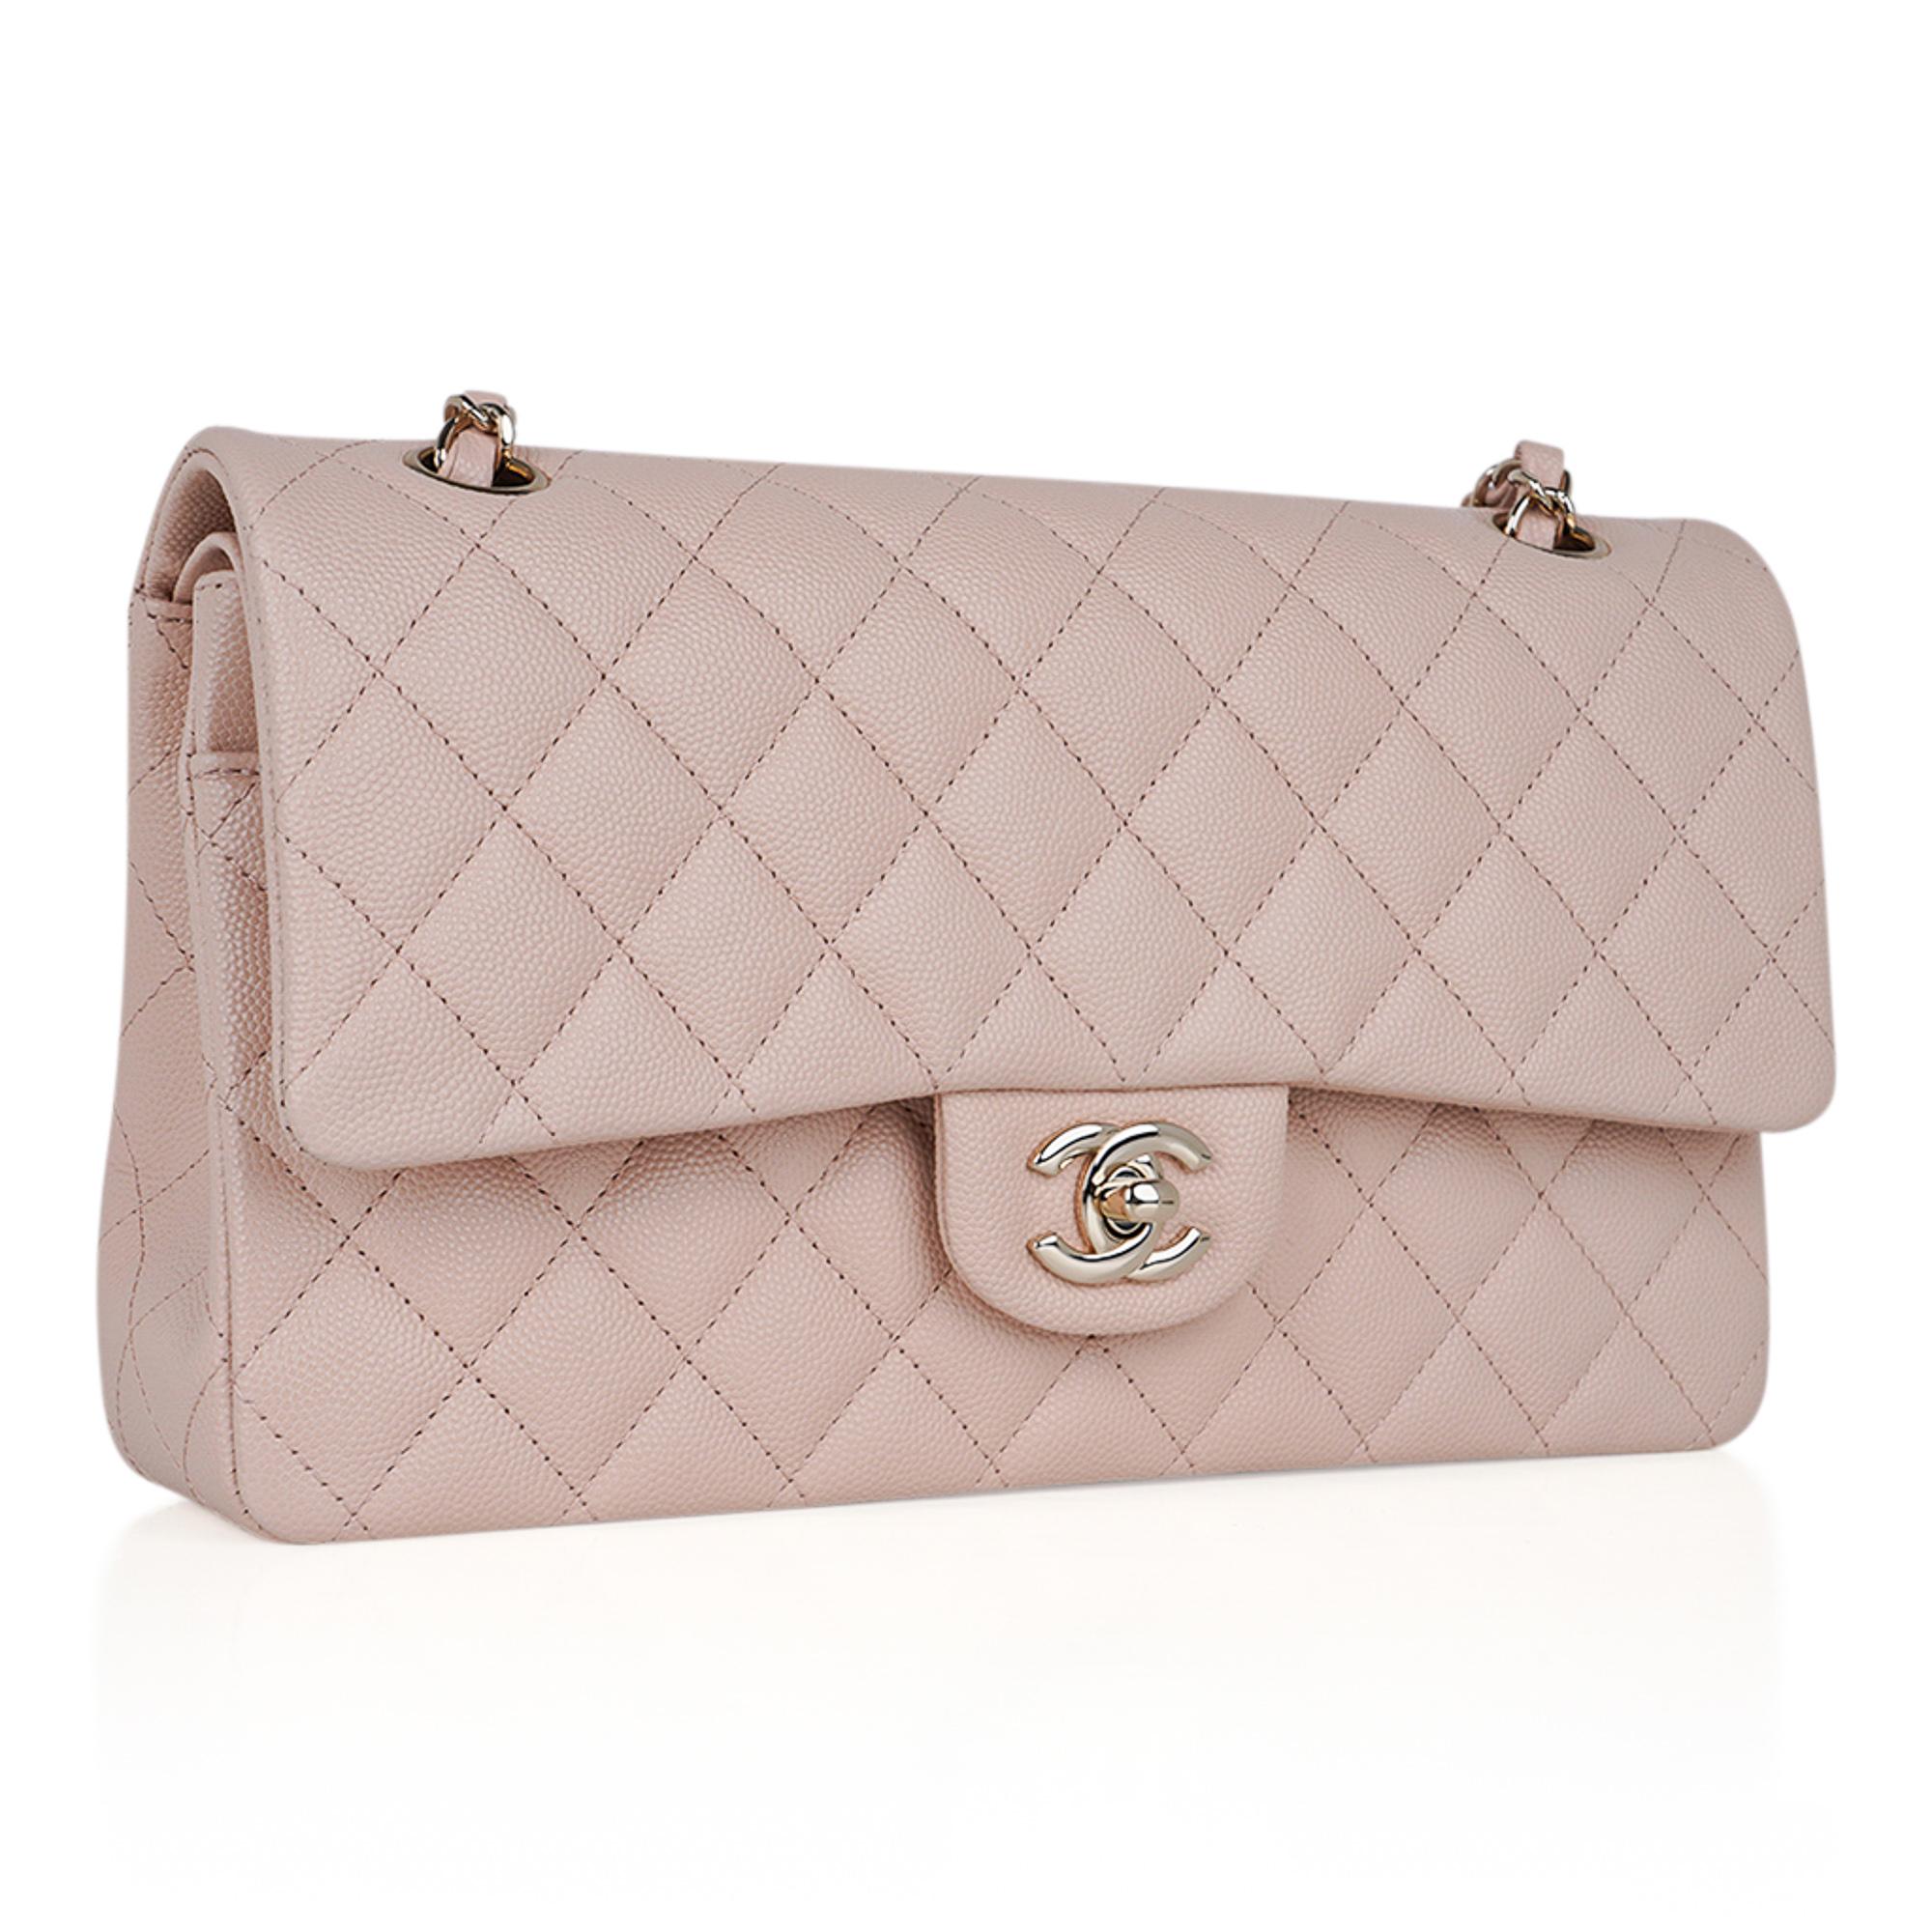 Mightychic offers a Chanel Classic Double Flap Bag featured in neutral Beige perfection.
Beautiful quilted Caviar leather with gold CC turn lock.
Dual chain link shoulder strap with woven leather detail.
Zip pocket under flap.
2 interior slot